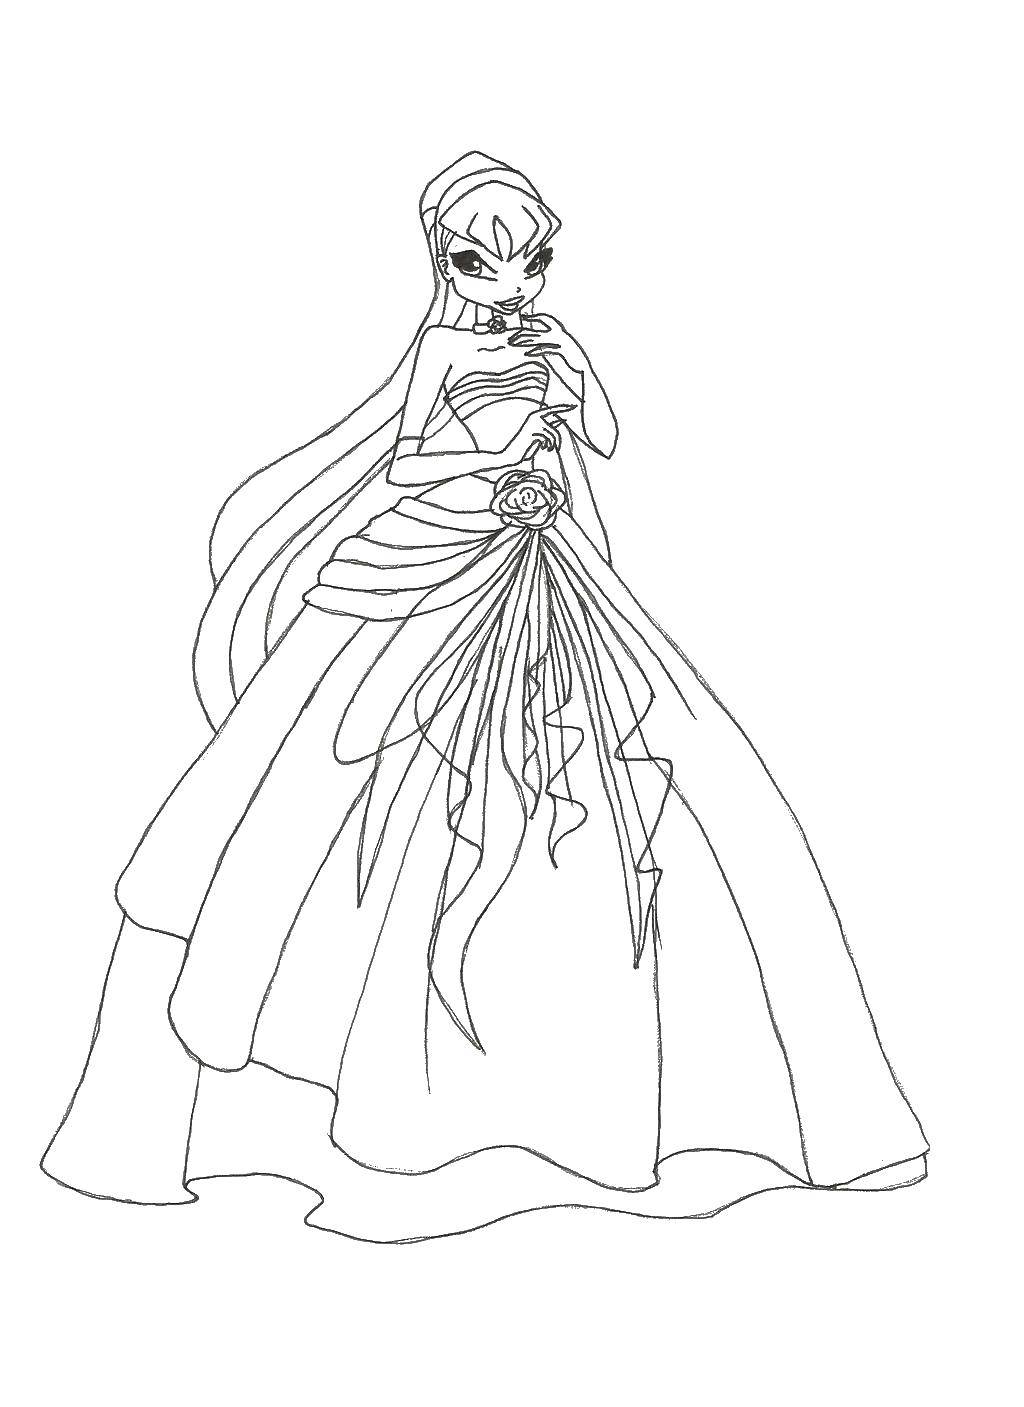 Coloring Stella wore a ball gown. Category Winx. Tags:  Character cartoon, Winx.